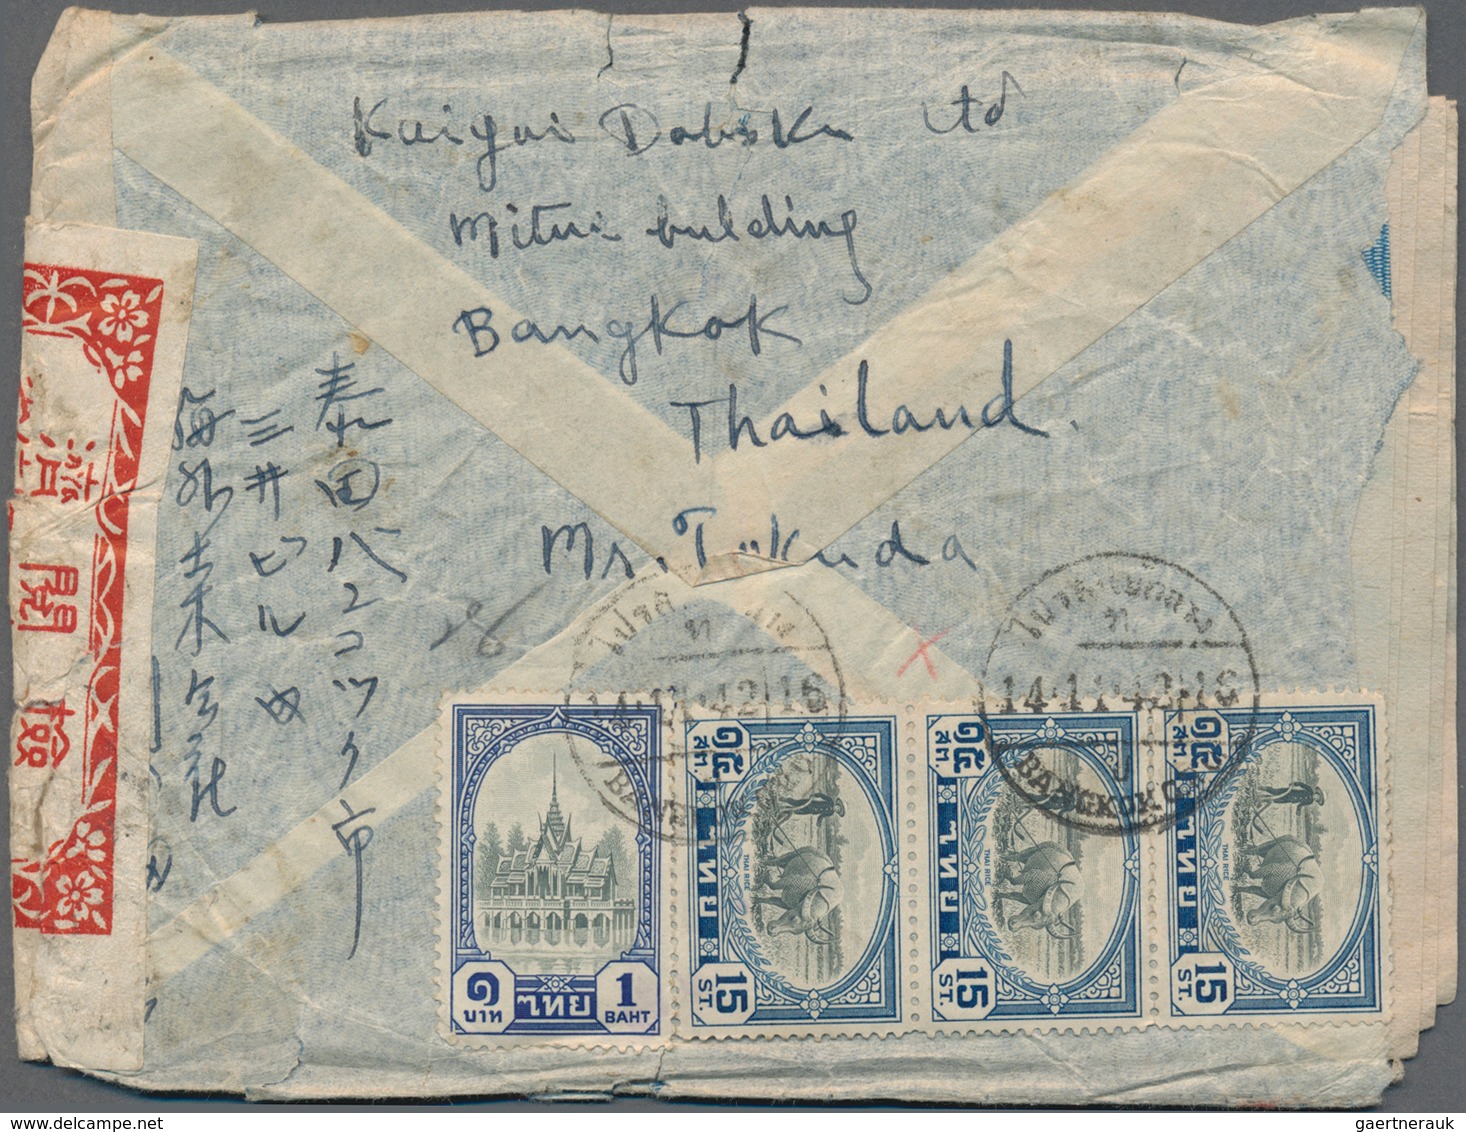 Thailand: 1941, 1.45 B. Frank Tied "BANGKOK G.P.O. 14.11.42" To Reverse Of Air Mail Cover To Japan, - Thailand